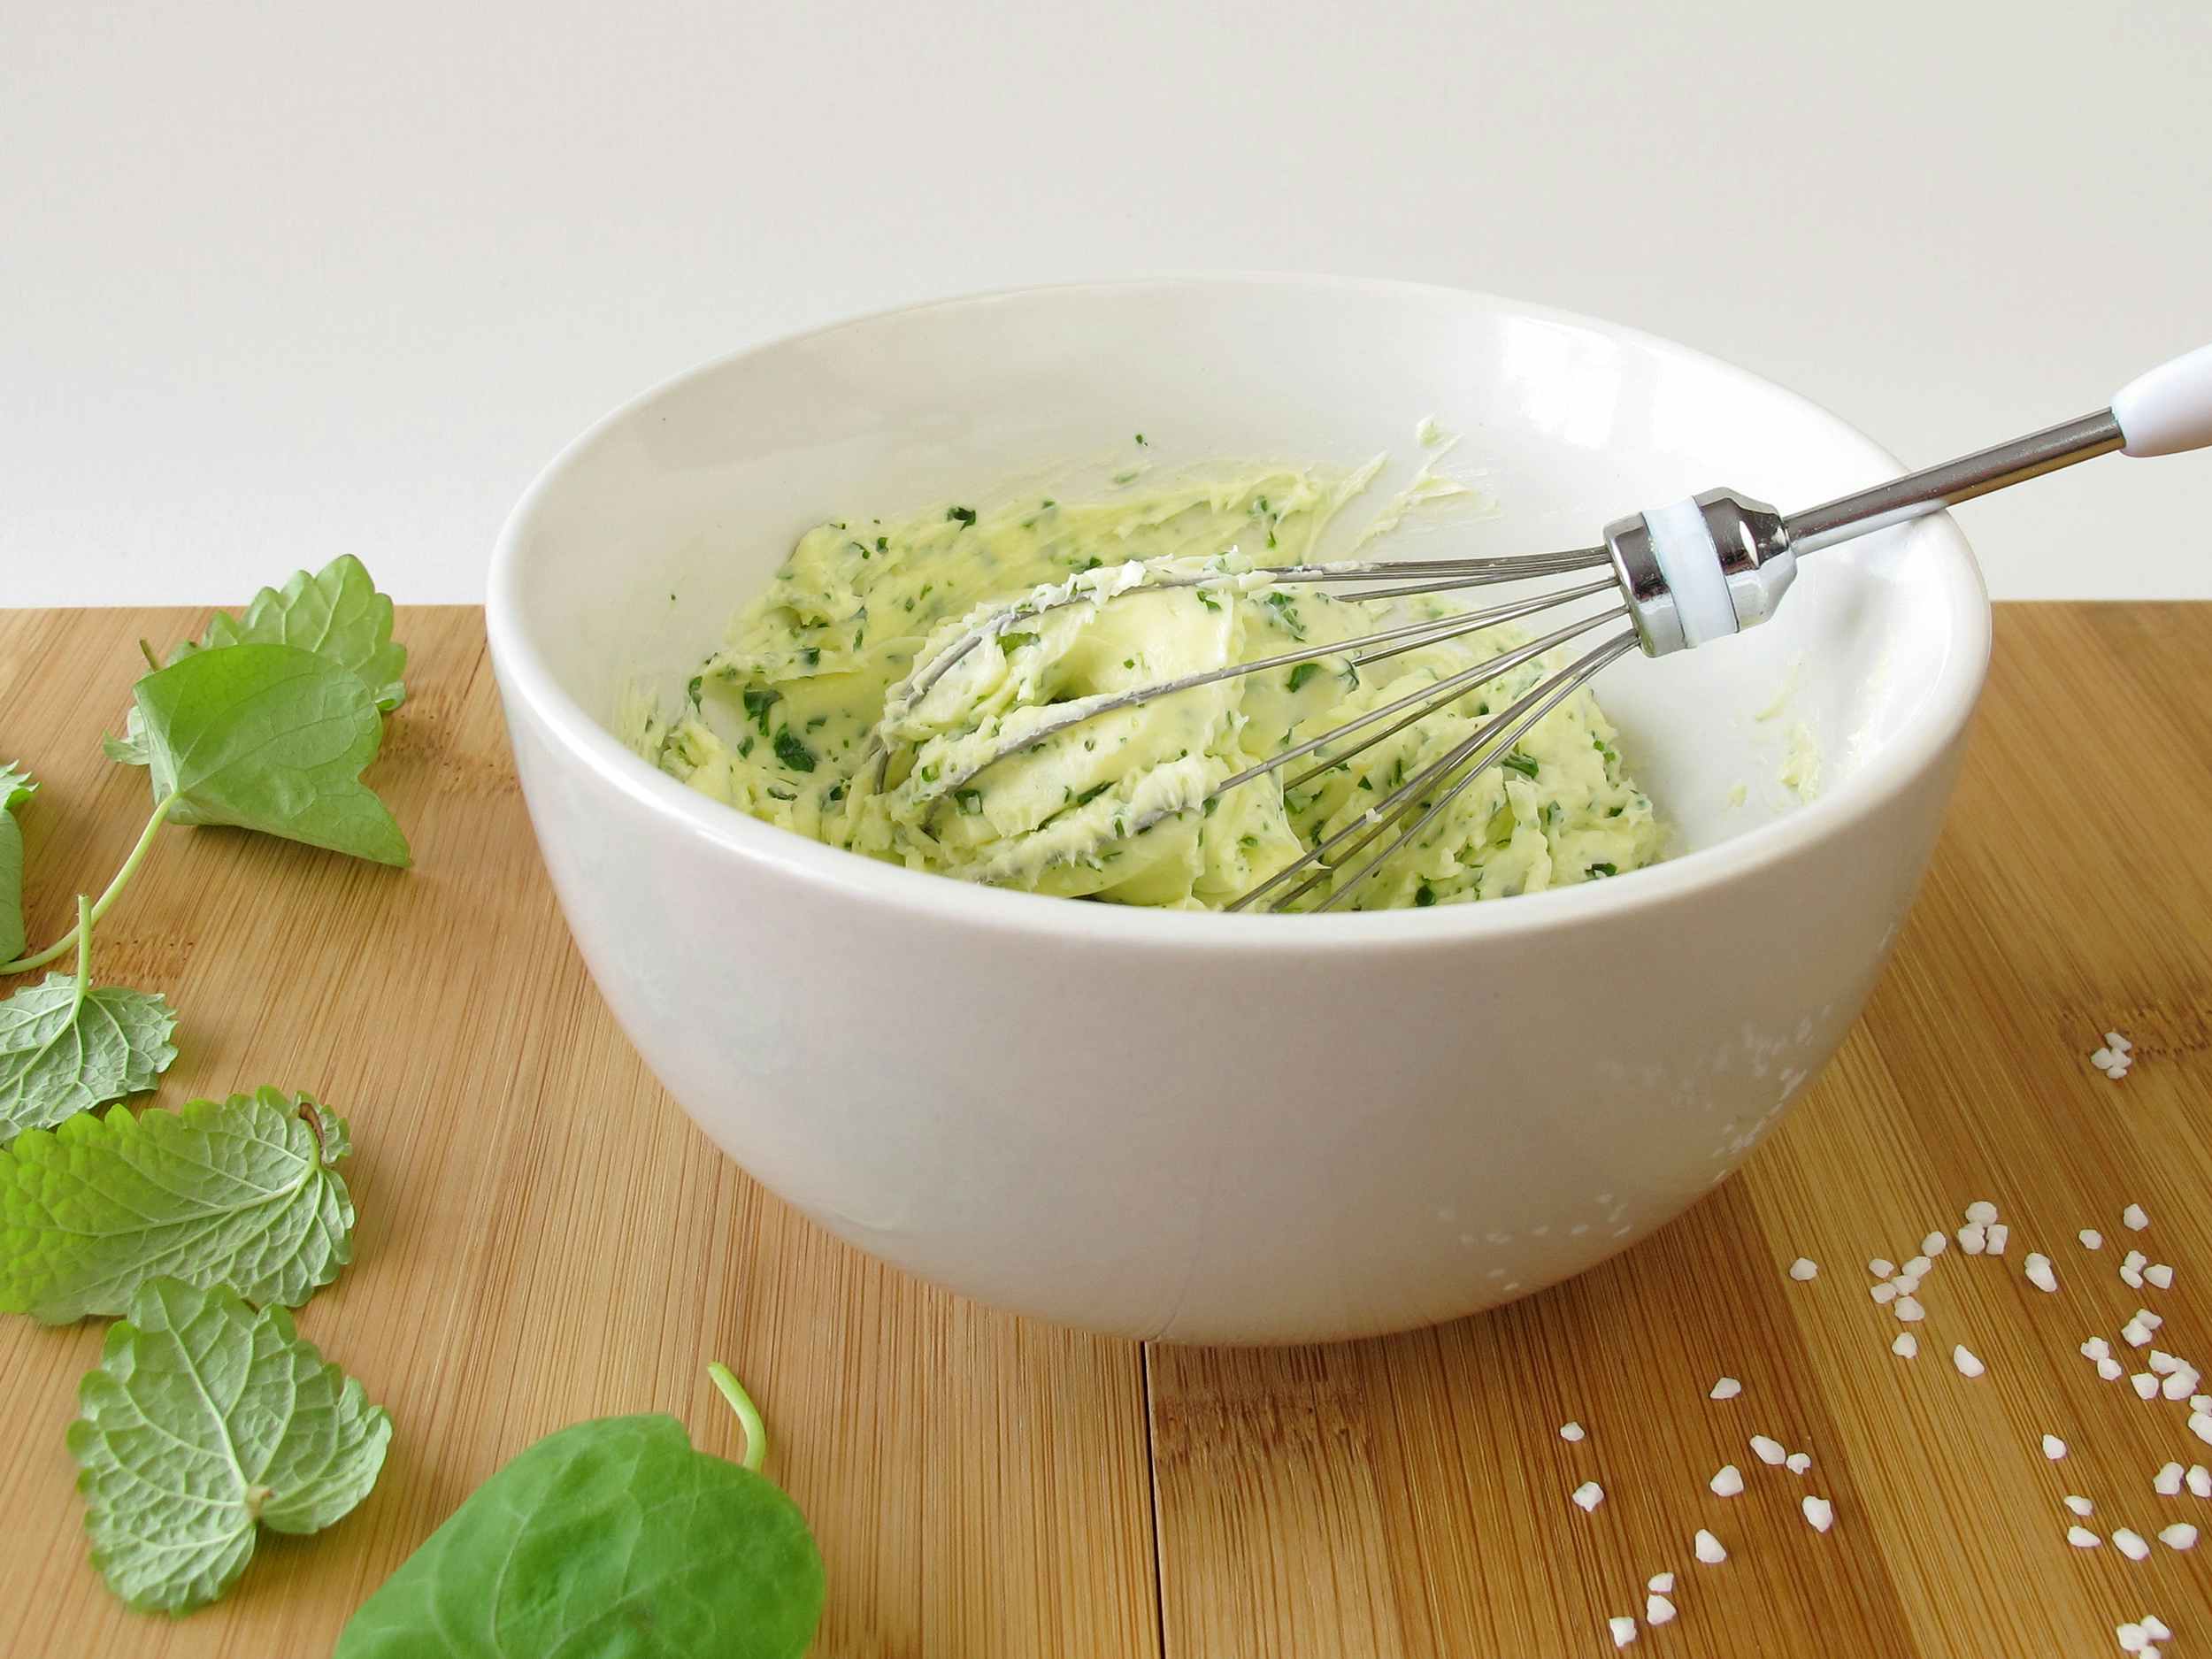 bowl of compound butter with whisk, herbs, and salt